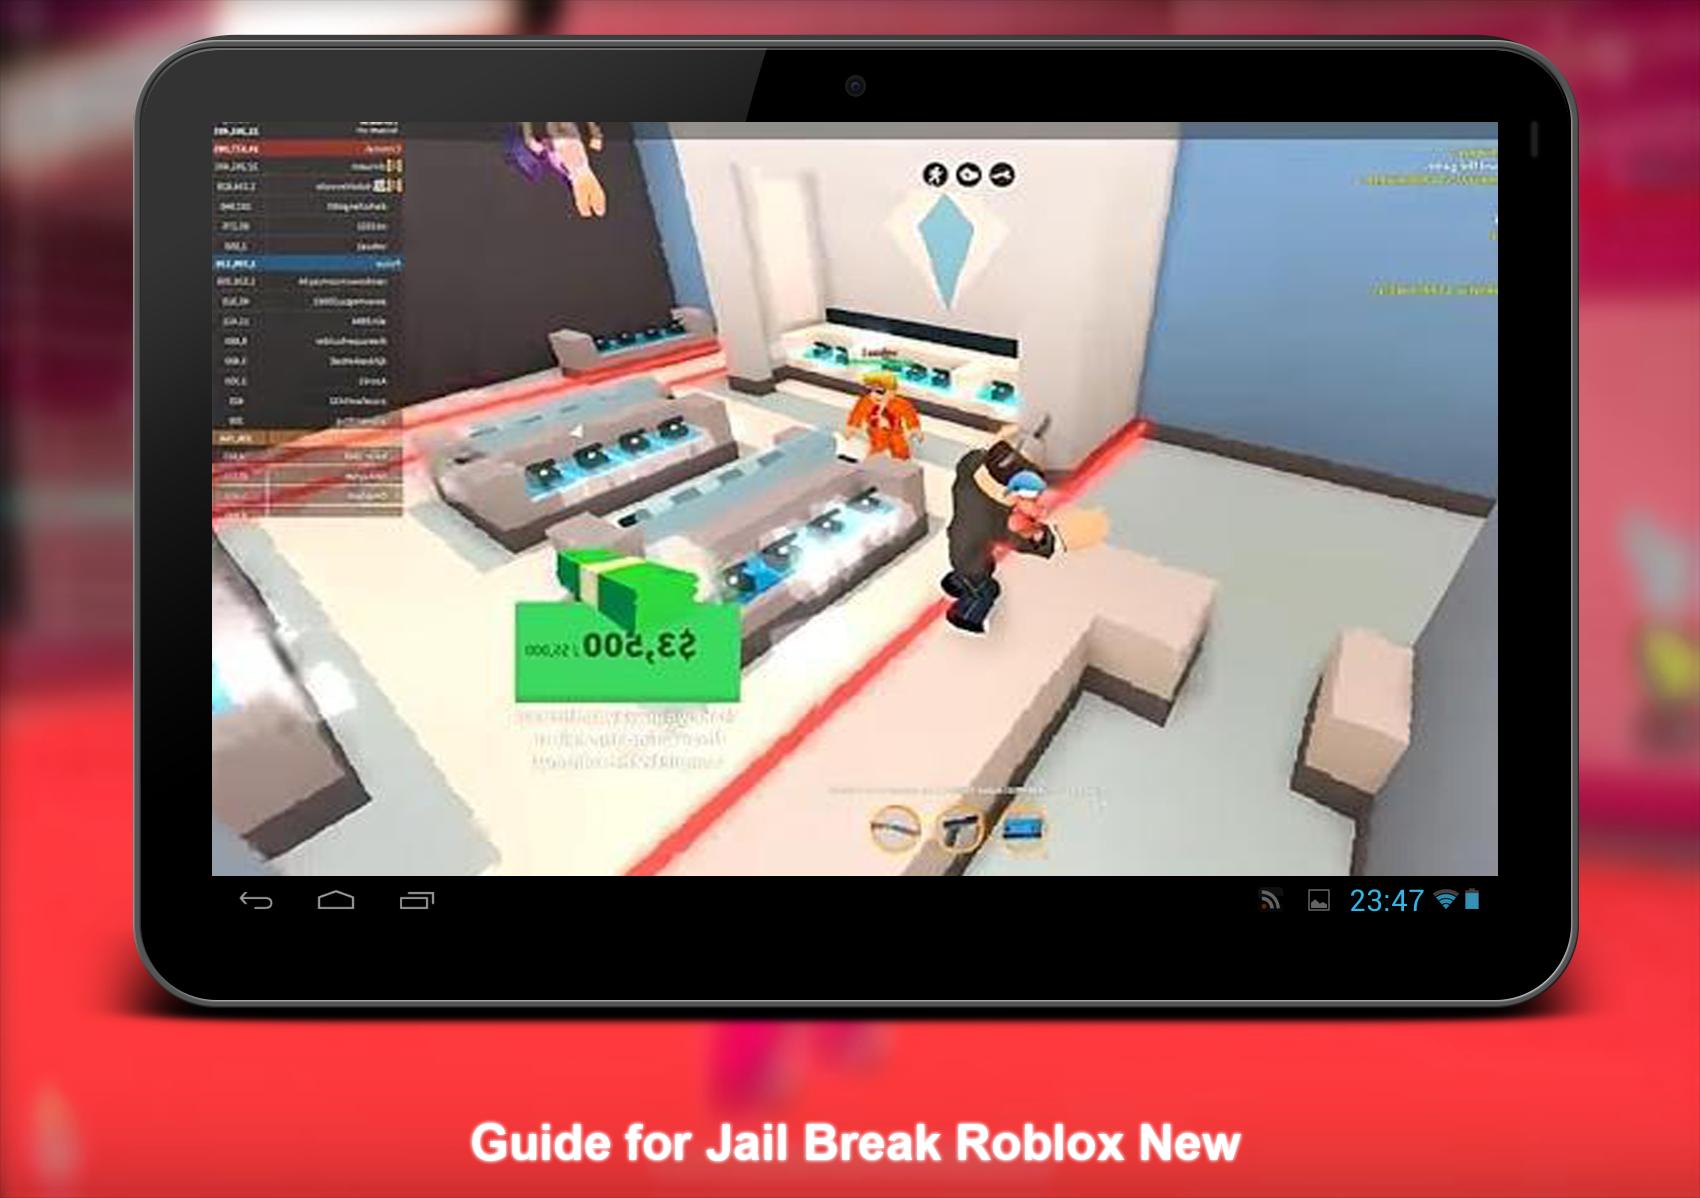 New Tips For Roblox Jailbreak Free For Android Apk Download - free jailbreak roblox tips for android apk download